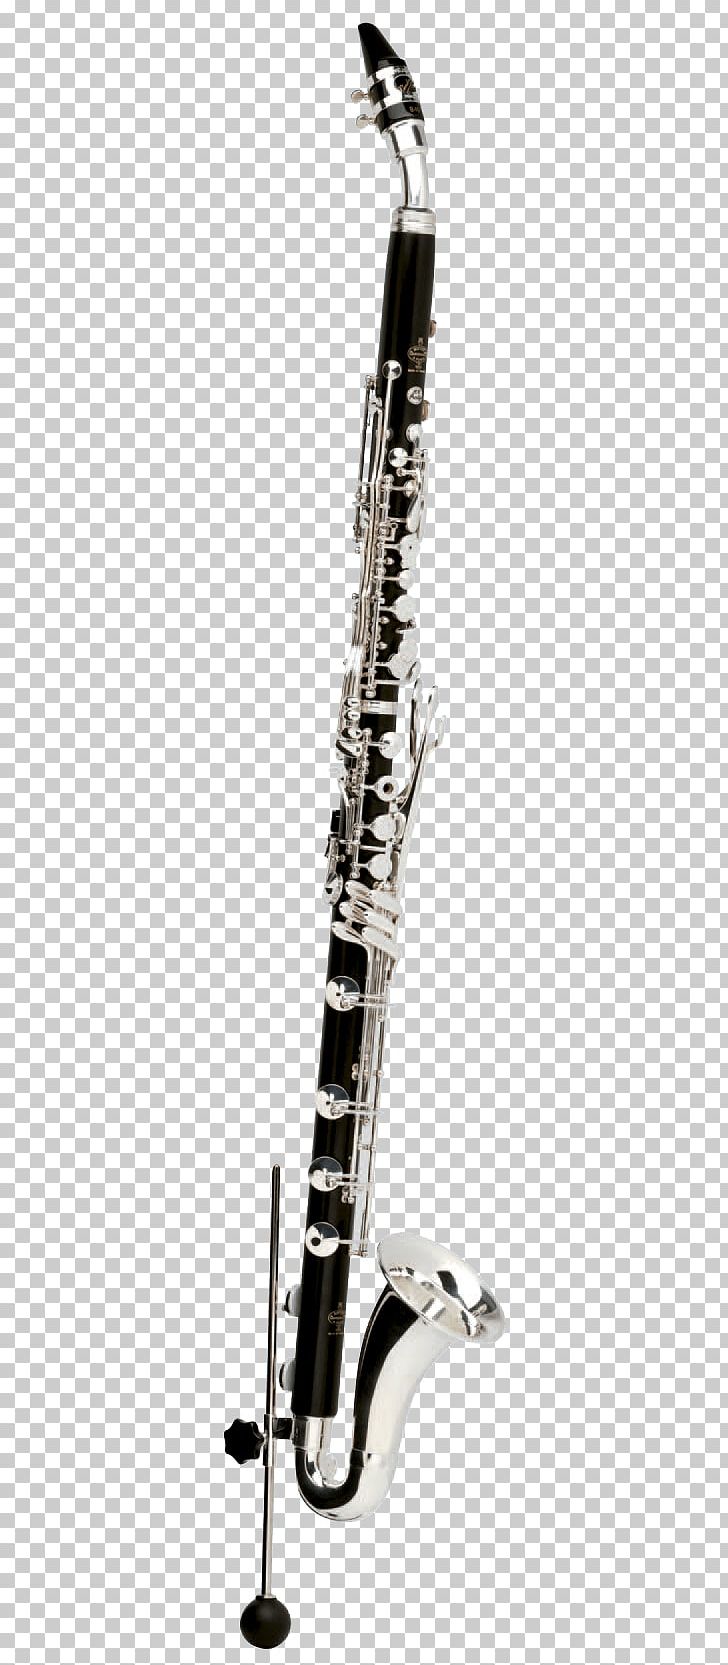 Baritone Saxophone Clarinet Oboe Cor Anglais PNG, Clipart, Baritone, Baritone Saxophone, Bass, Basset, Bass Oboe Free PNG Download